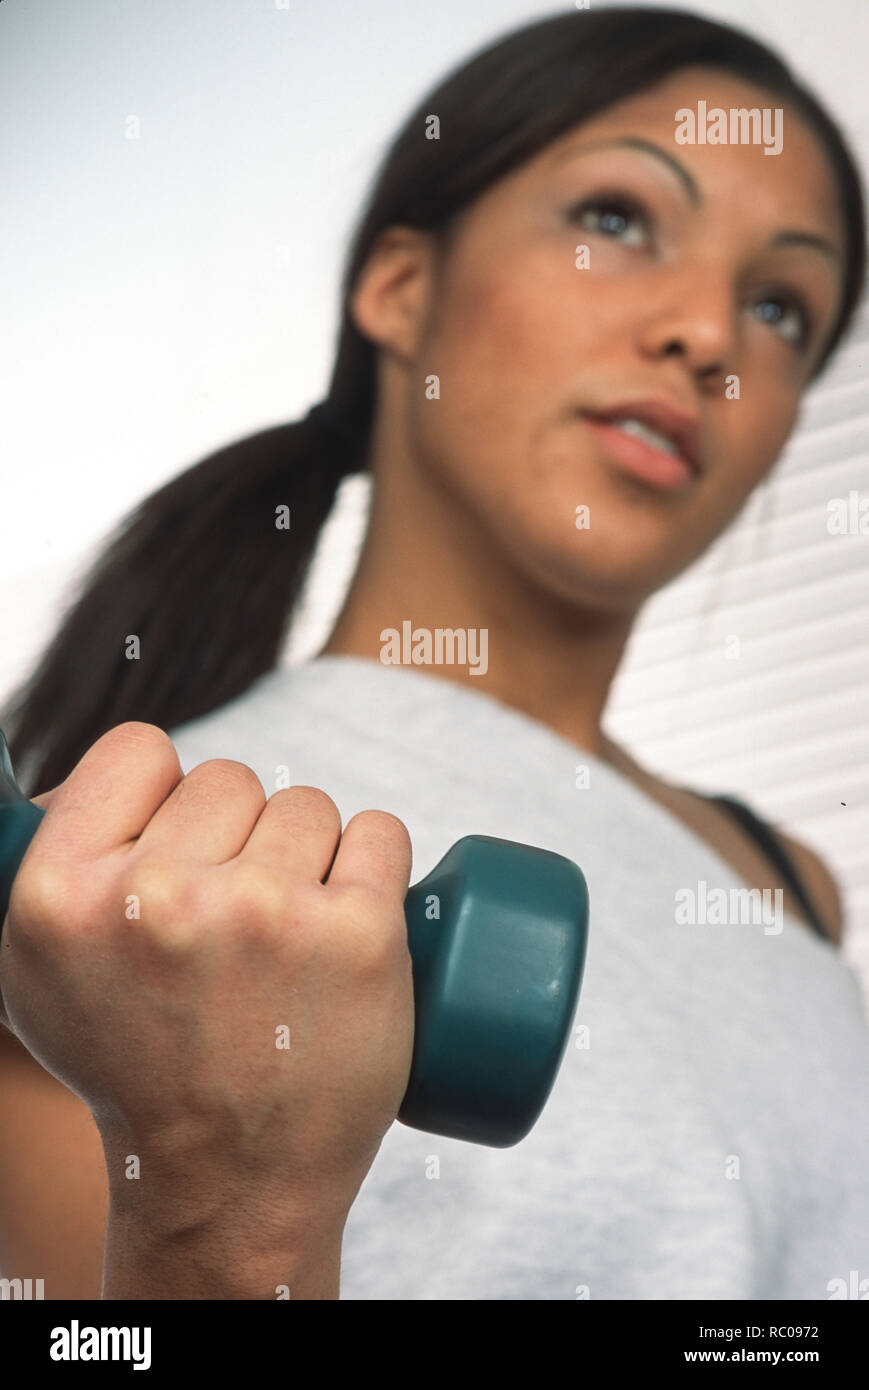 Young female adult lifting weight, USA Stock Photo